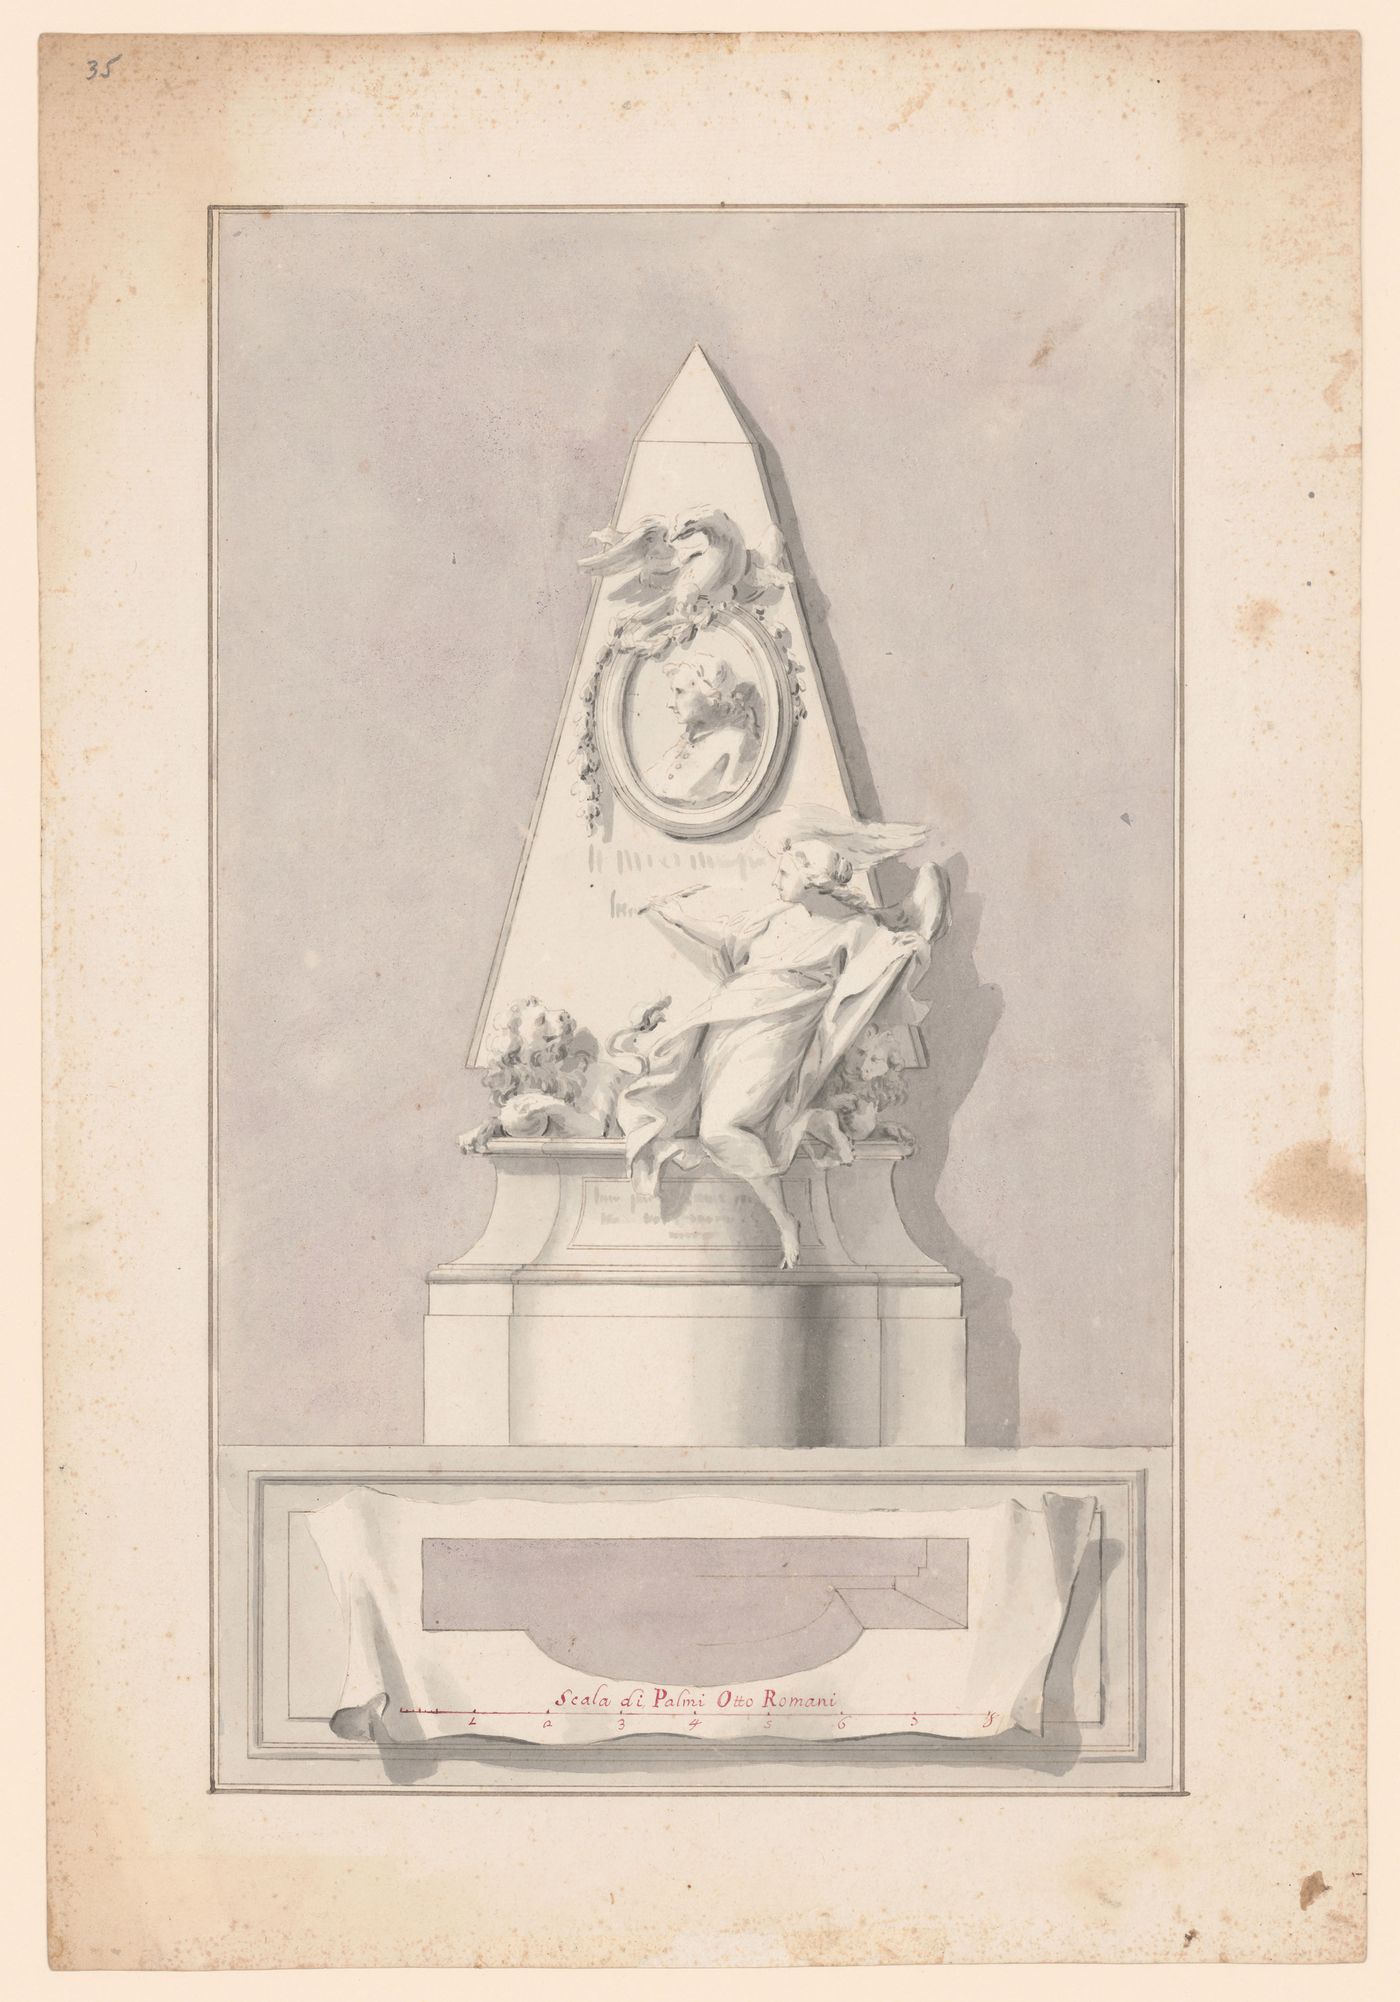 Elevation and plan for the monument to Cardinal Calcagnini, Rome